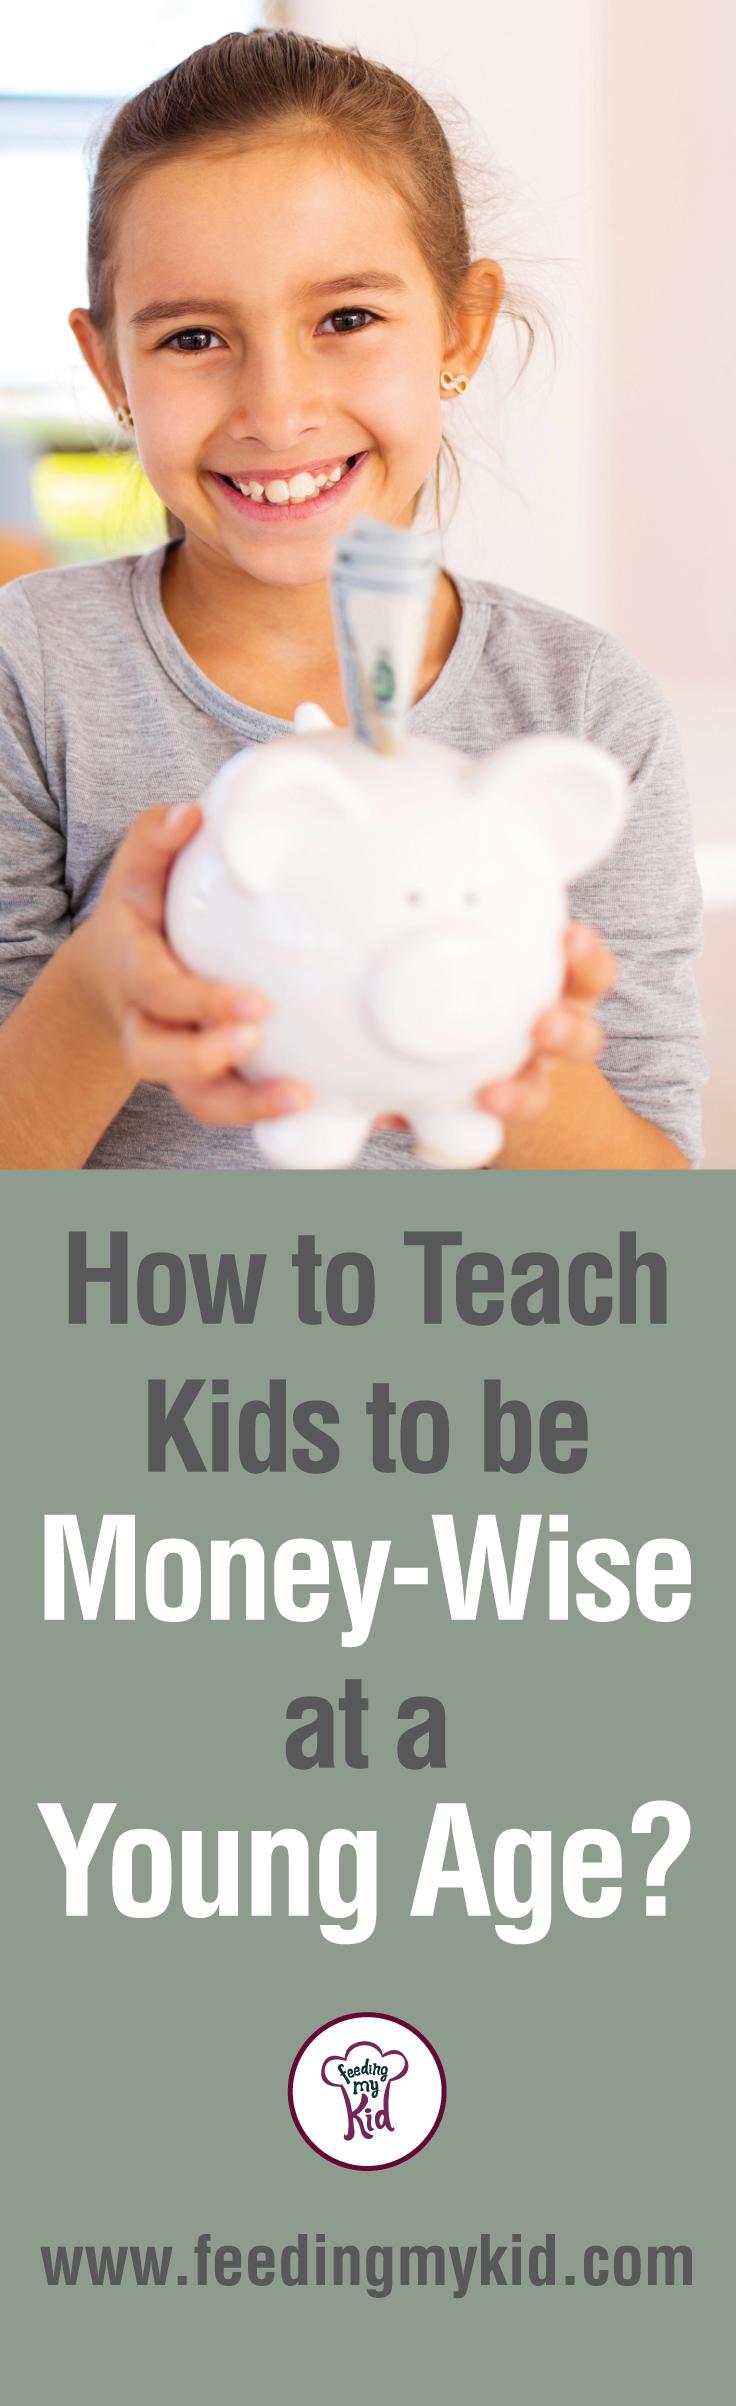 Why It's Important to Teach Kids Great Money Habits at a Young Age